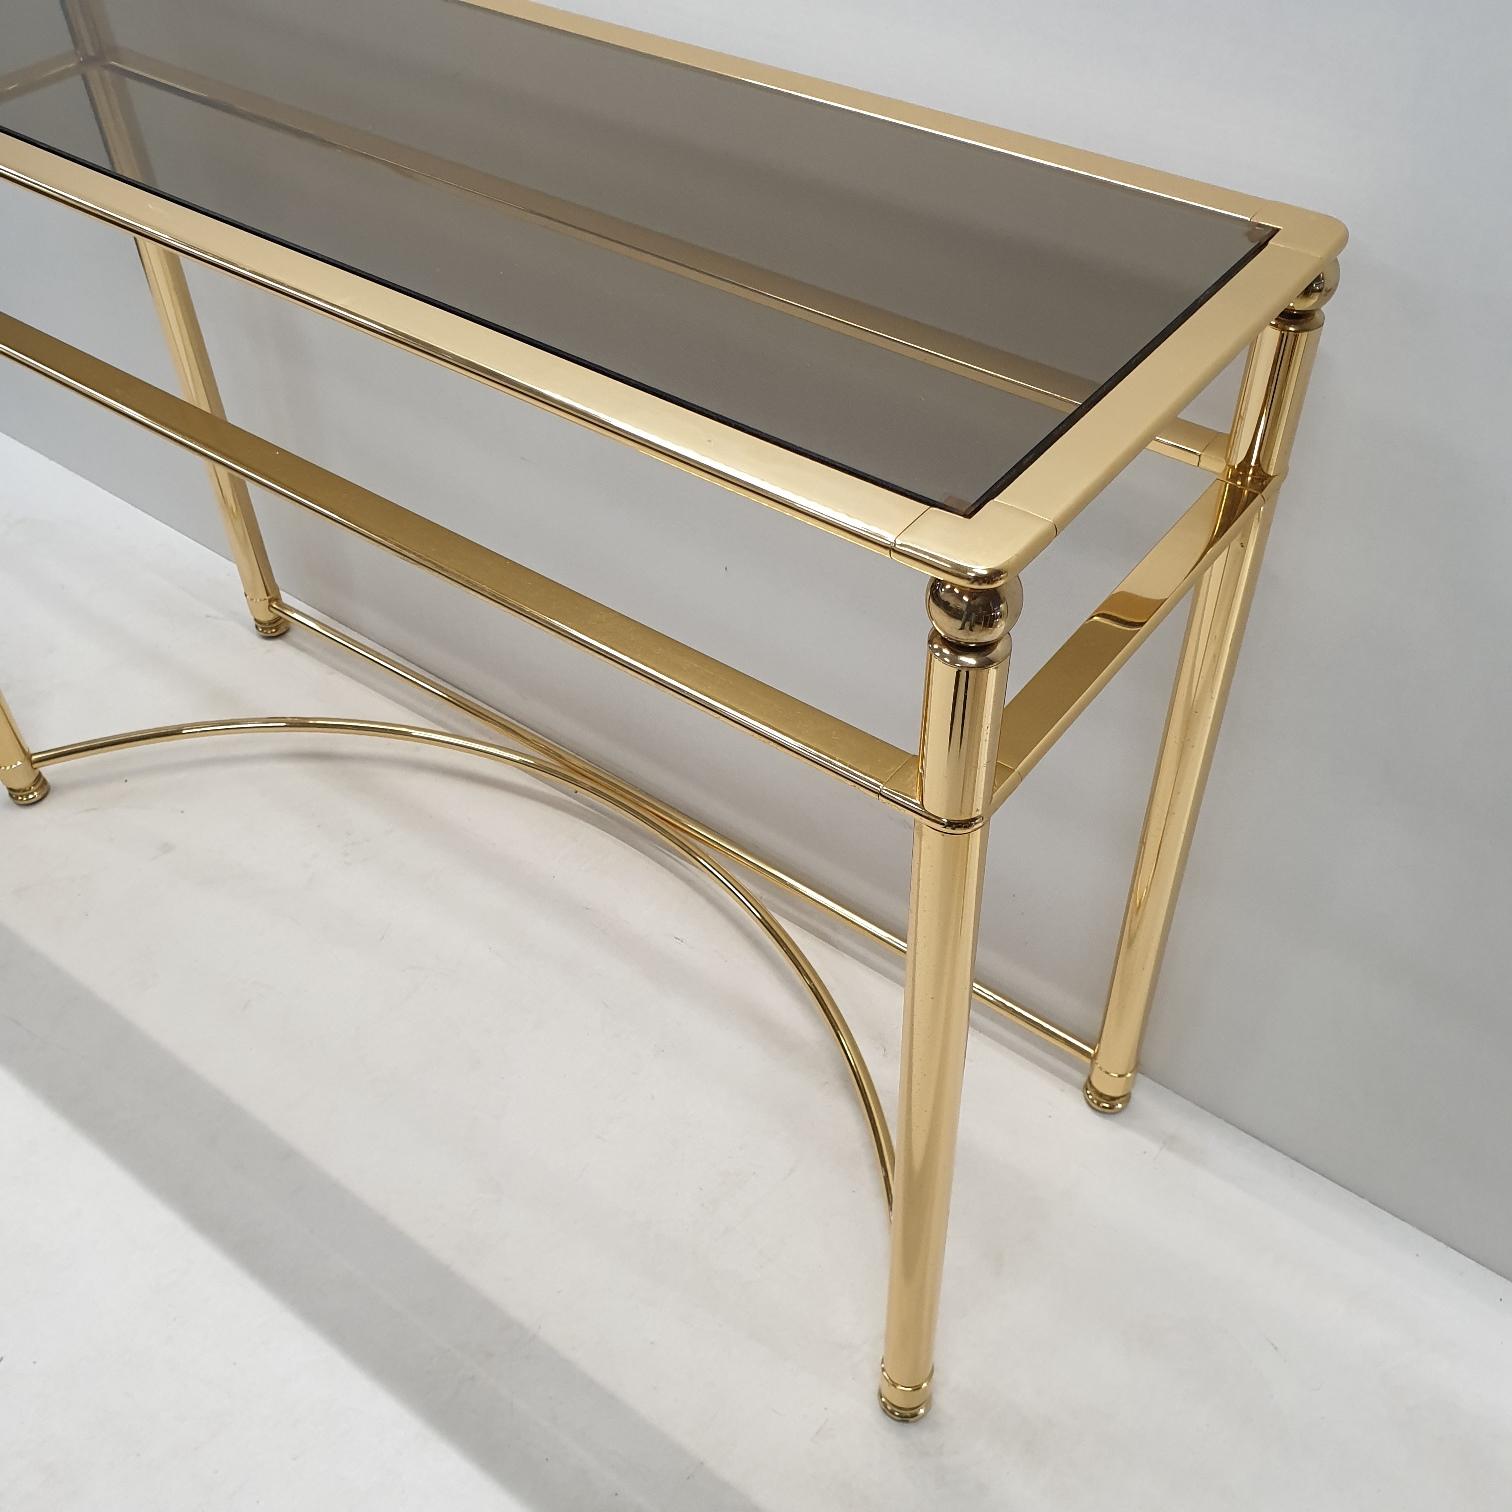 20th Century Gold-Plated Console Table with Smoked Cut Glass, 1980s For Sale